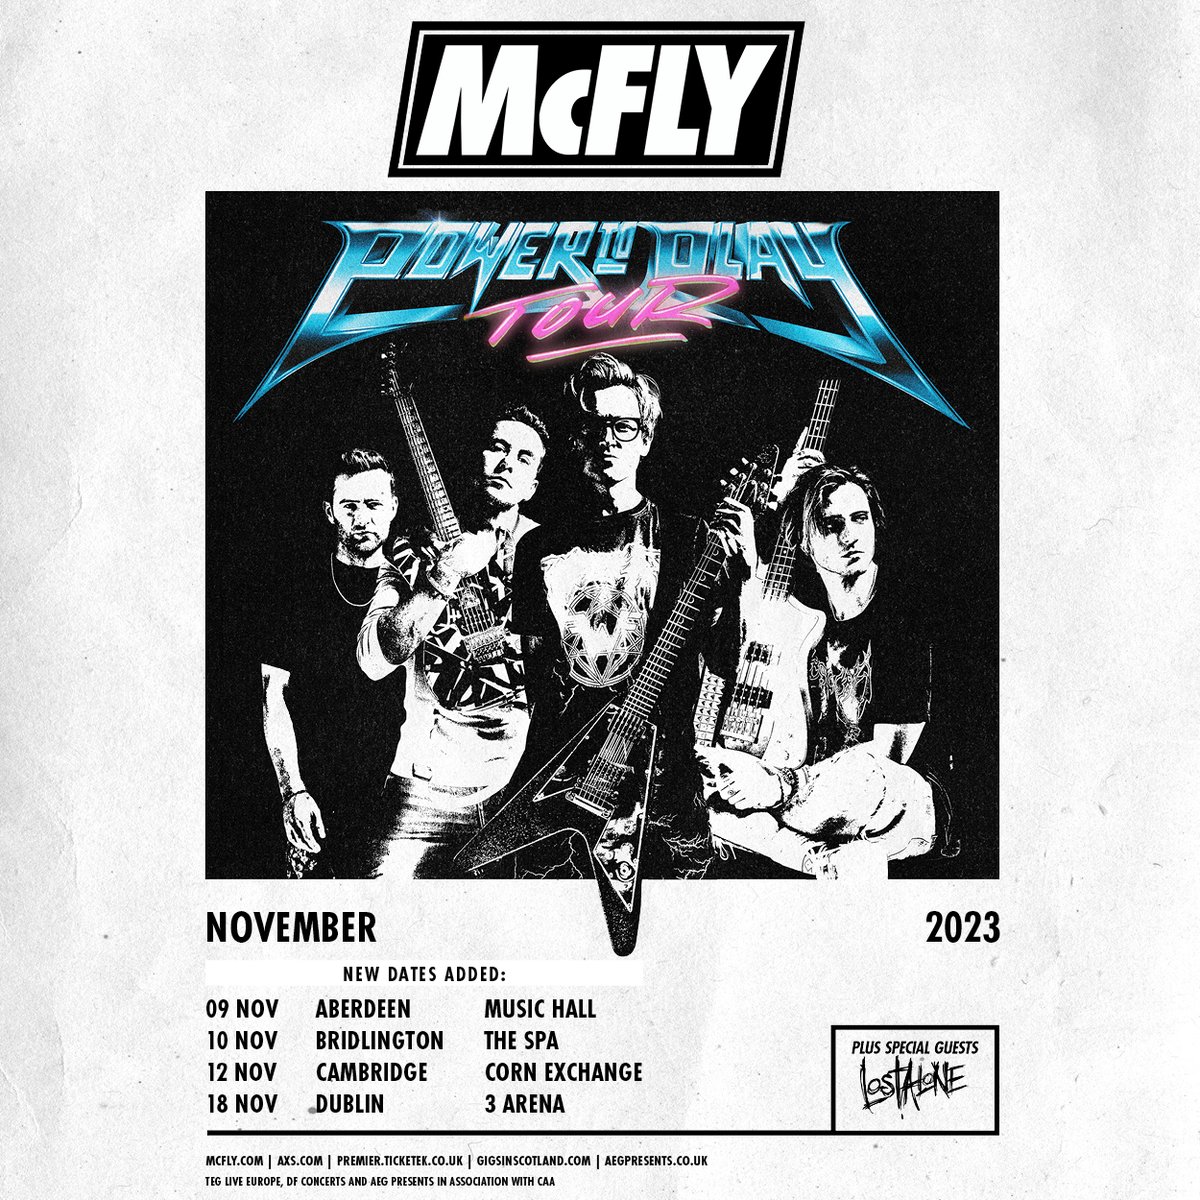 🎸  @mcflymusic are bringing their Power to Play tour to Bridlington Spa on Fri 10 November!

Tickets on general sale Fri 16 June 9am.

Tickets on sale to Bridlington Spa membership holders Thu 15 June 9am.

More Info orlo.uk/vr7kN